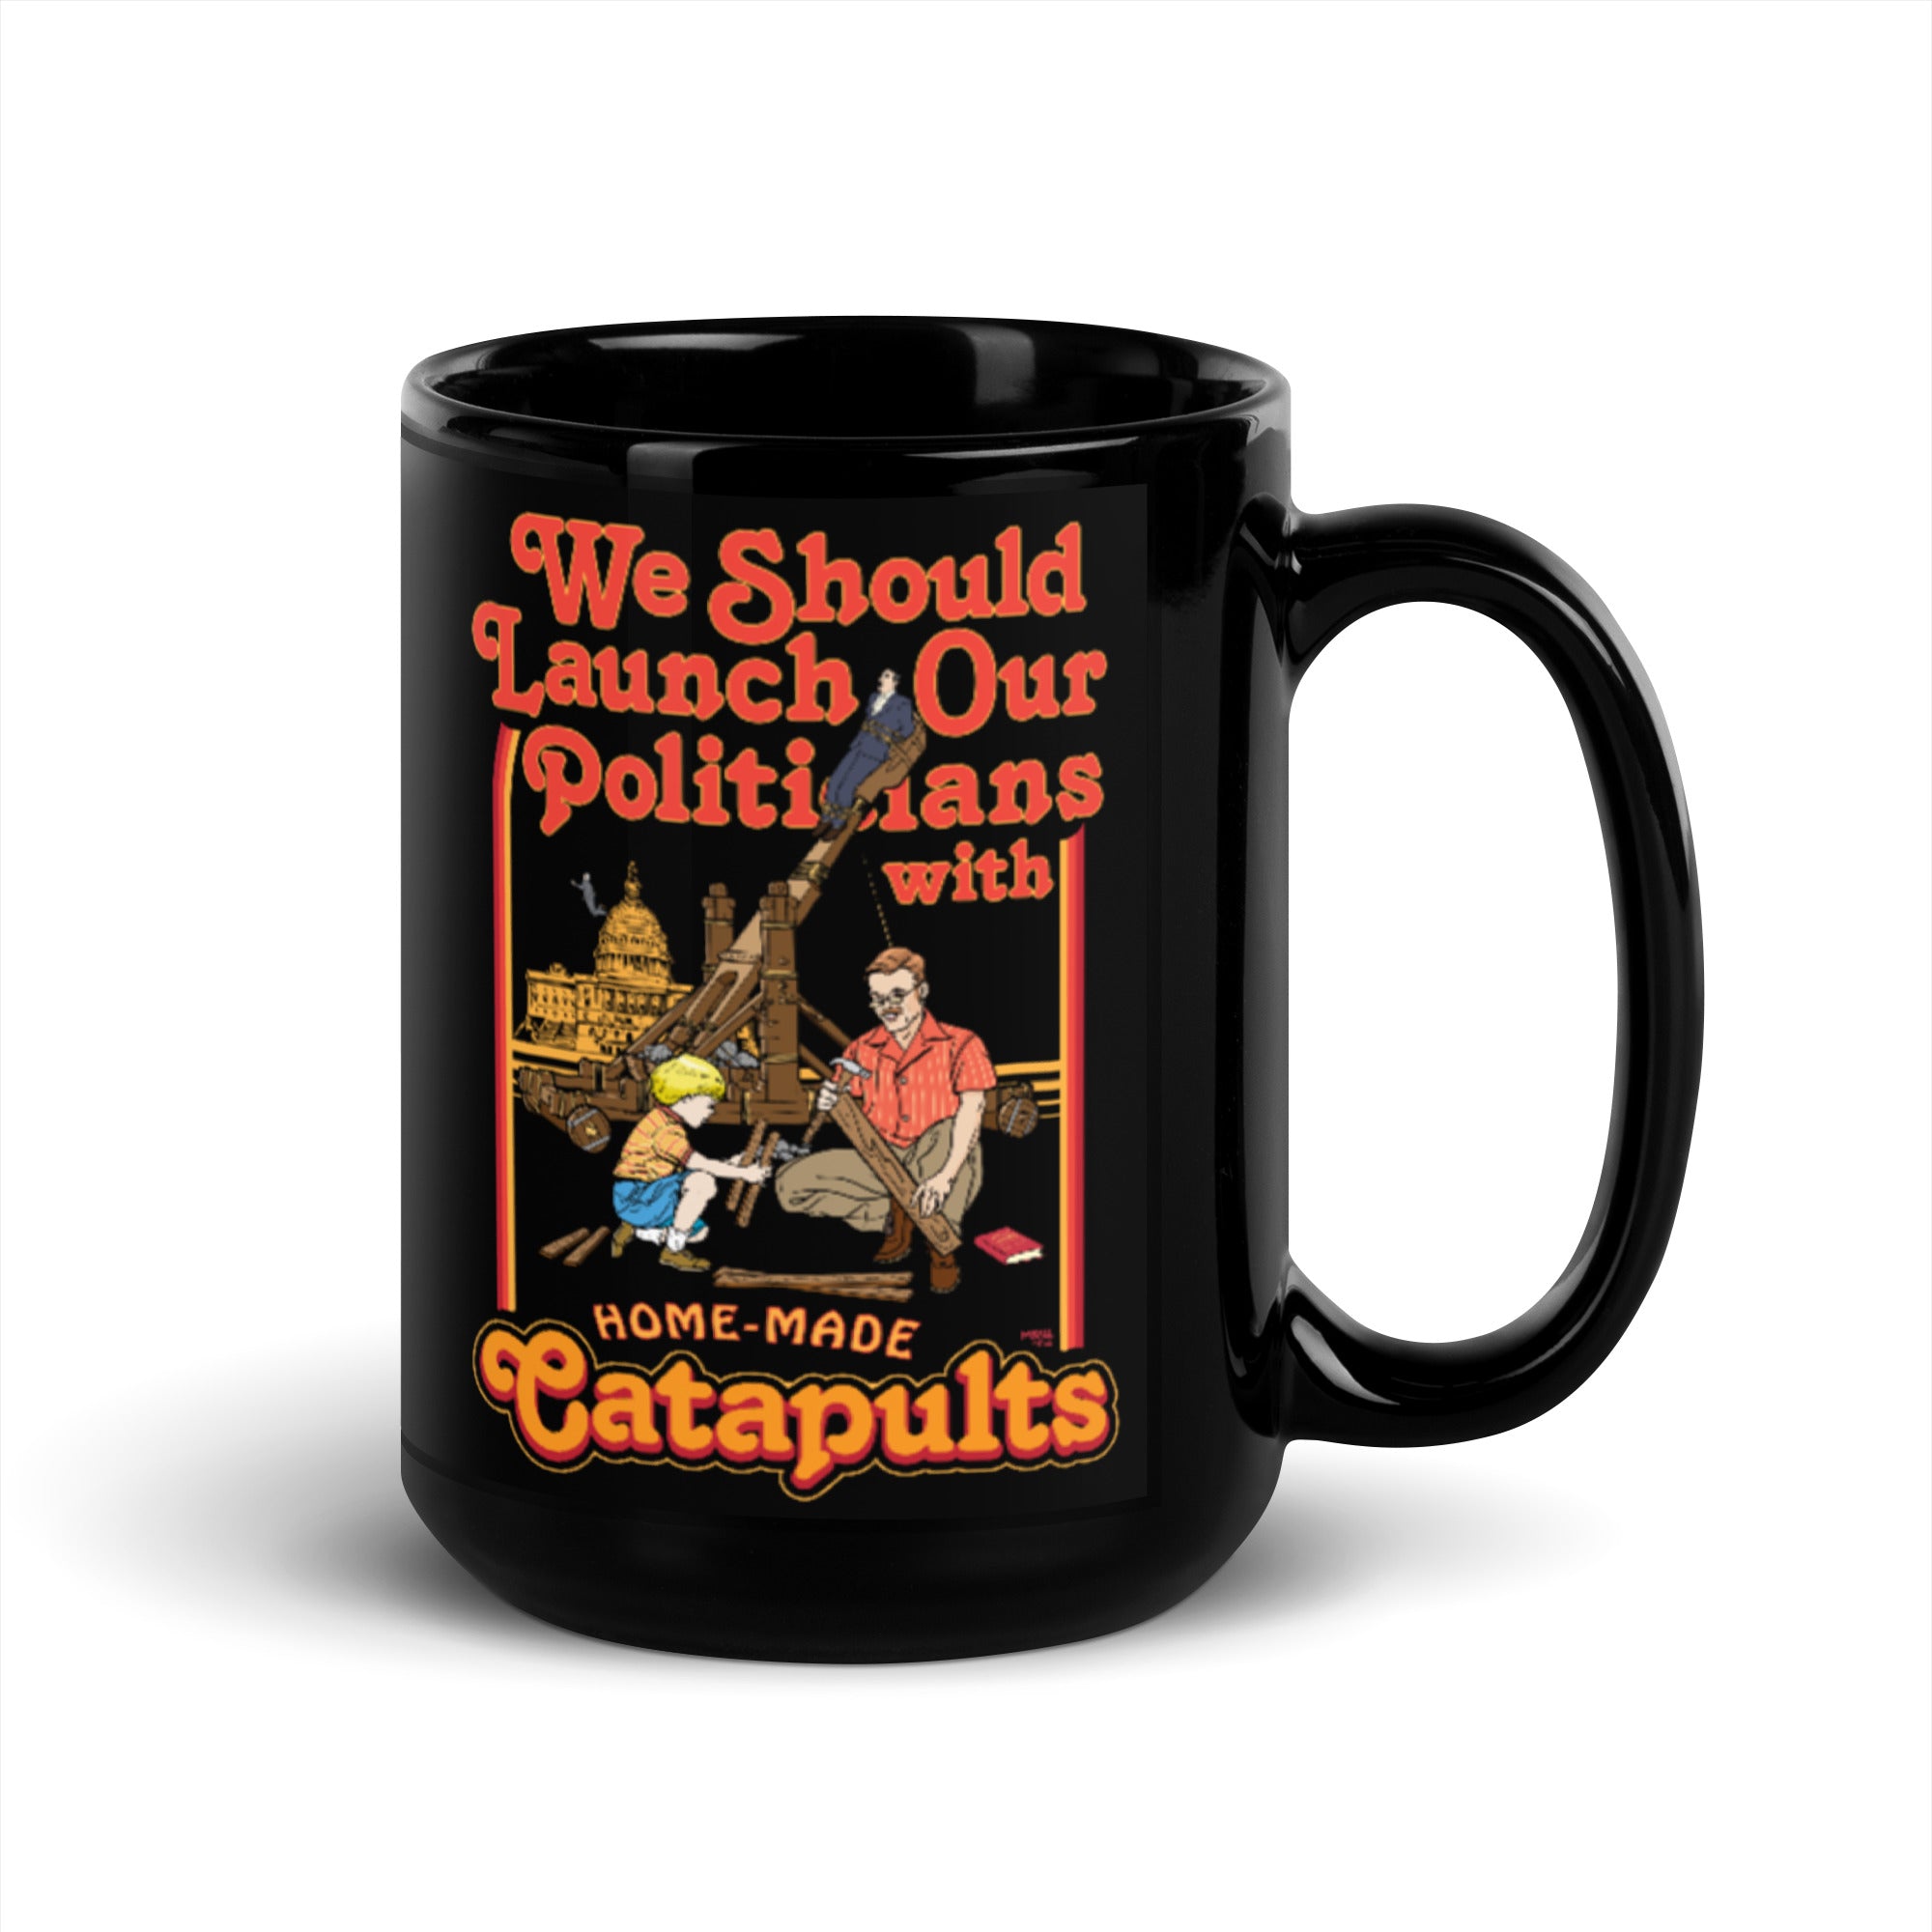 We Should Launch Our Politicians from Catapults Mug